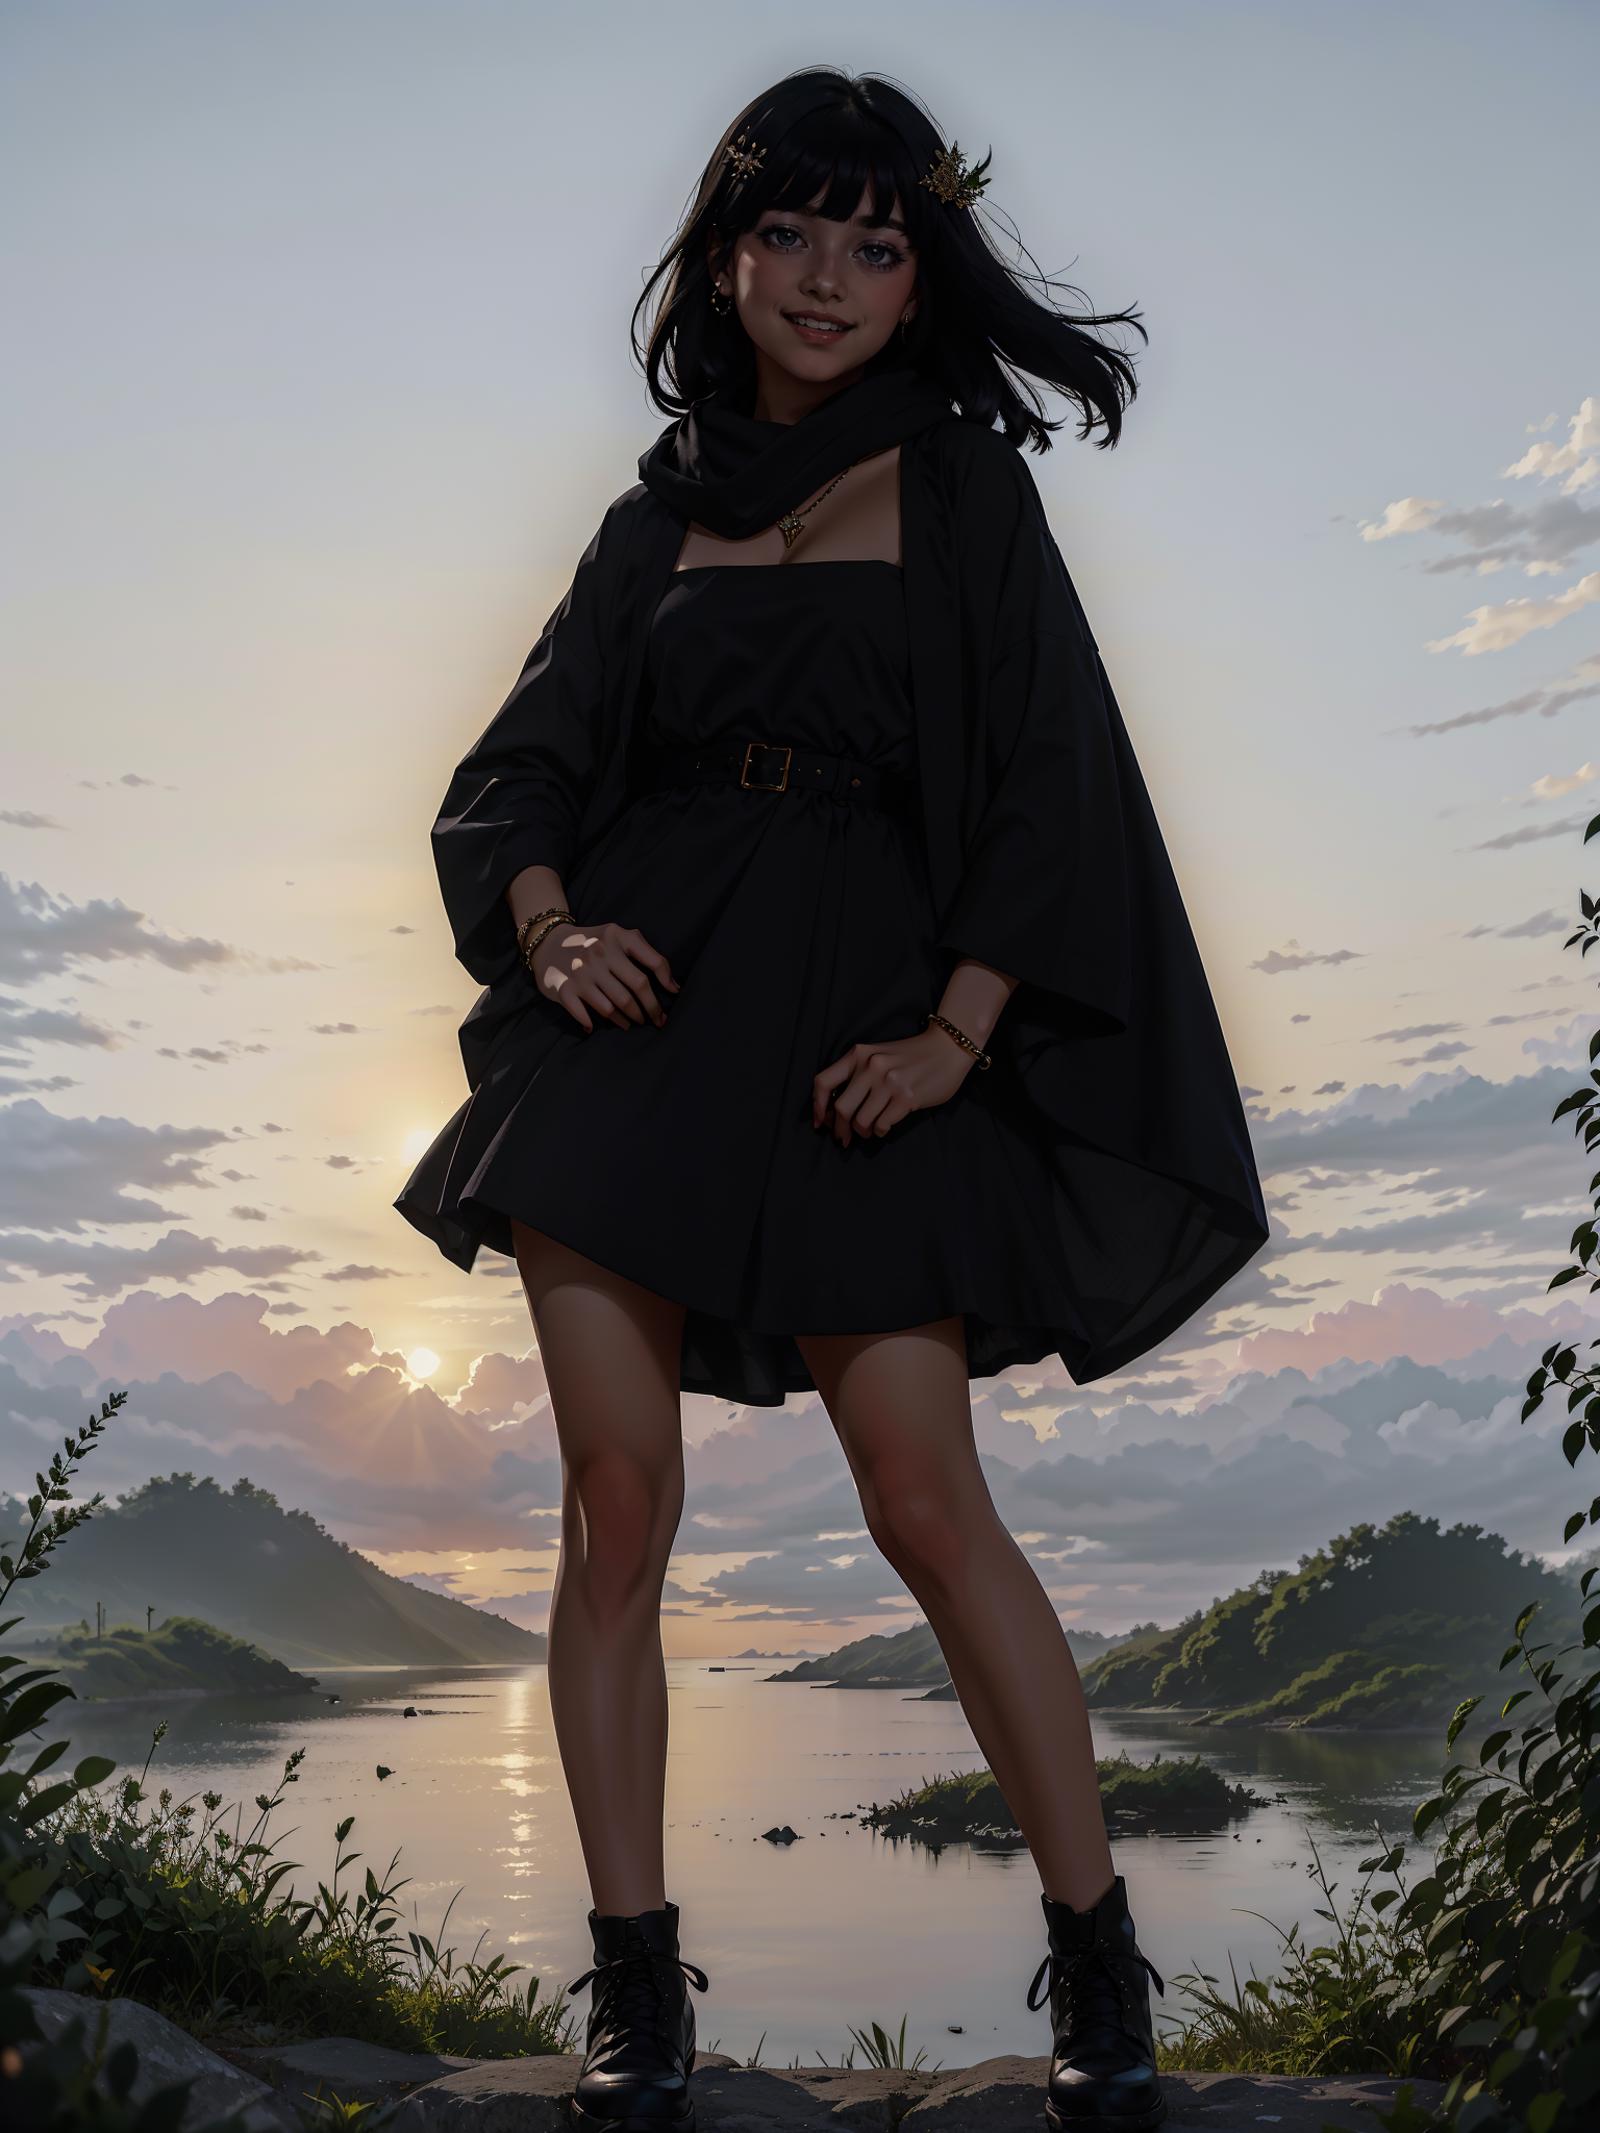 Illustration of a woman in black dress standing near a lake.